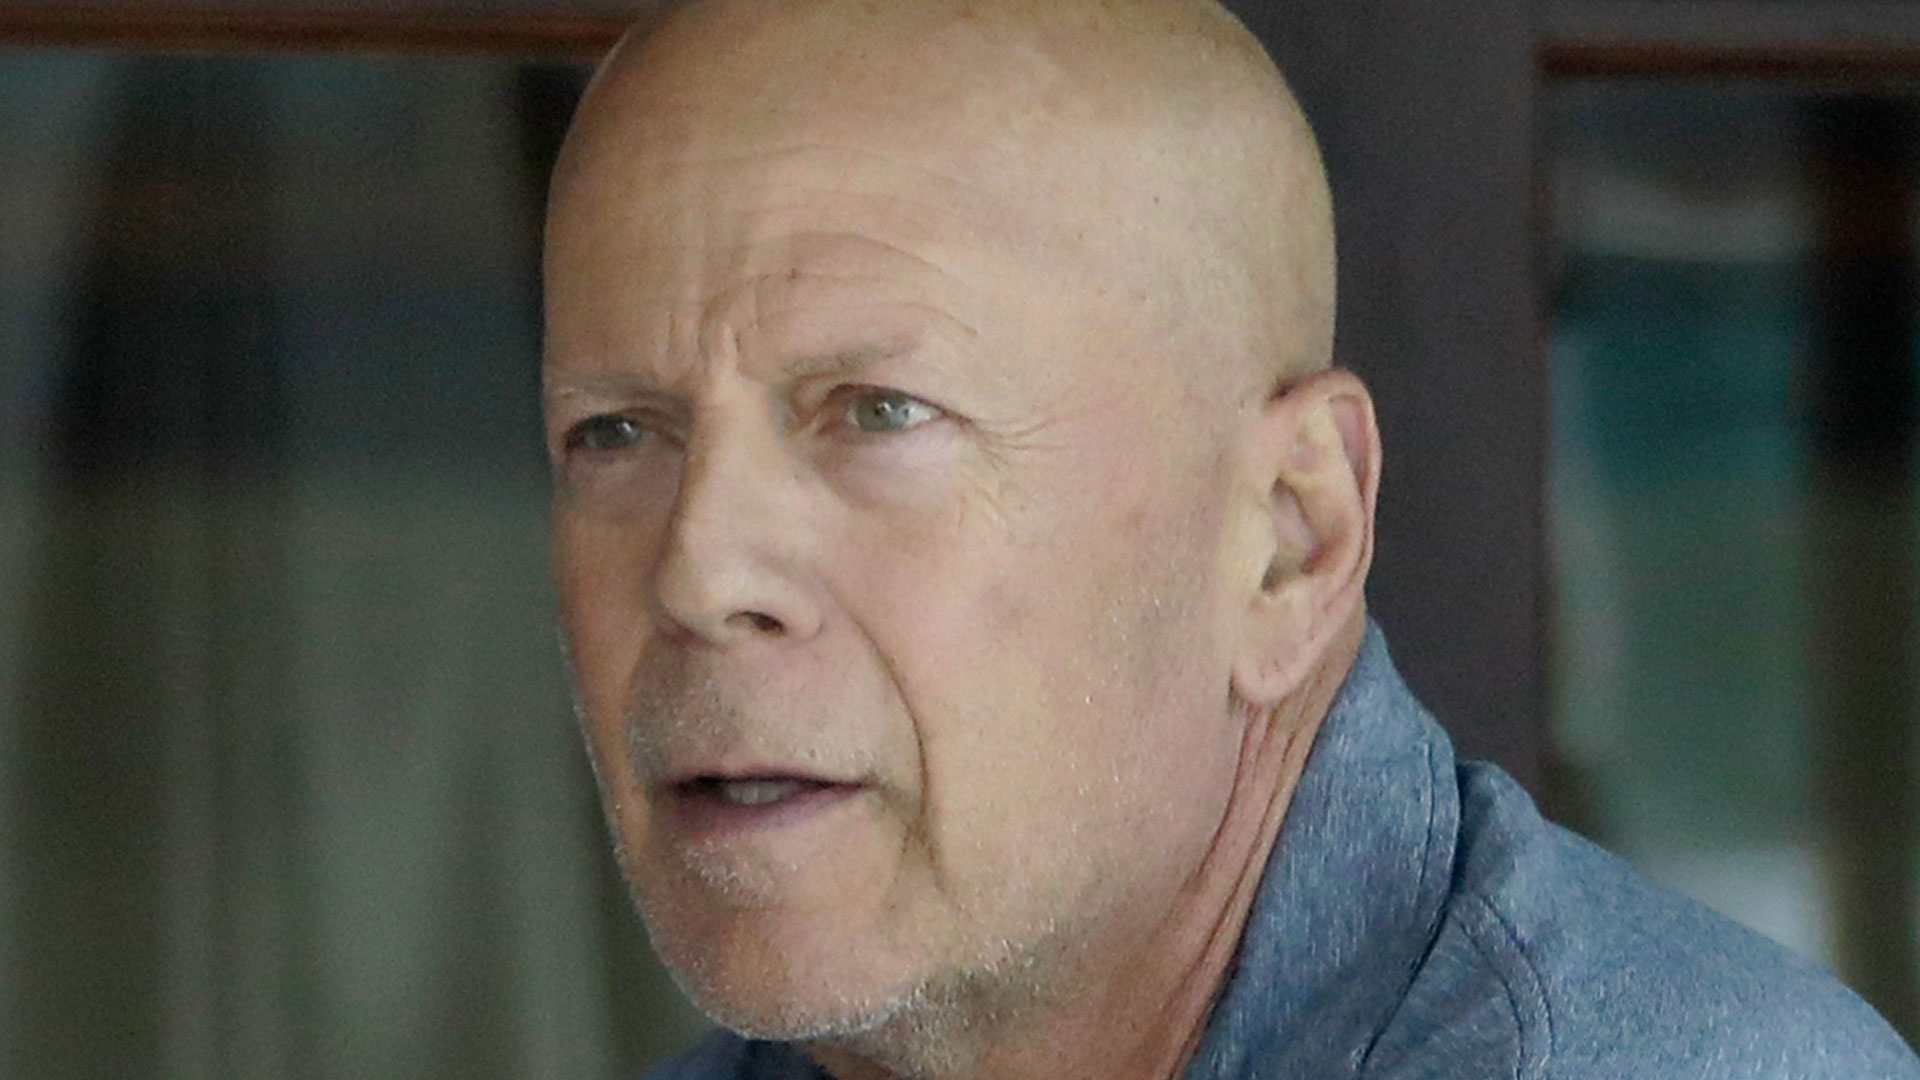 Bruce Willis shared his diagnosis in March 2022 (Grosby) Photo © 2022 Backgrid/The Grosby Group